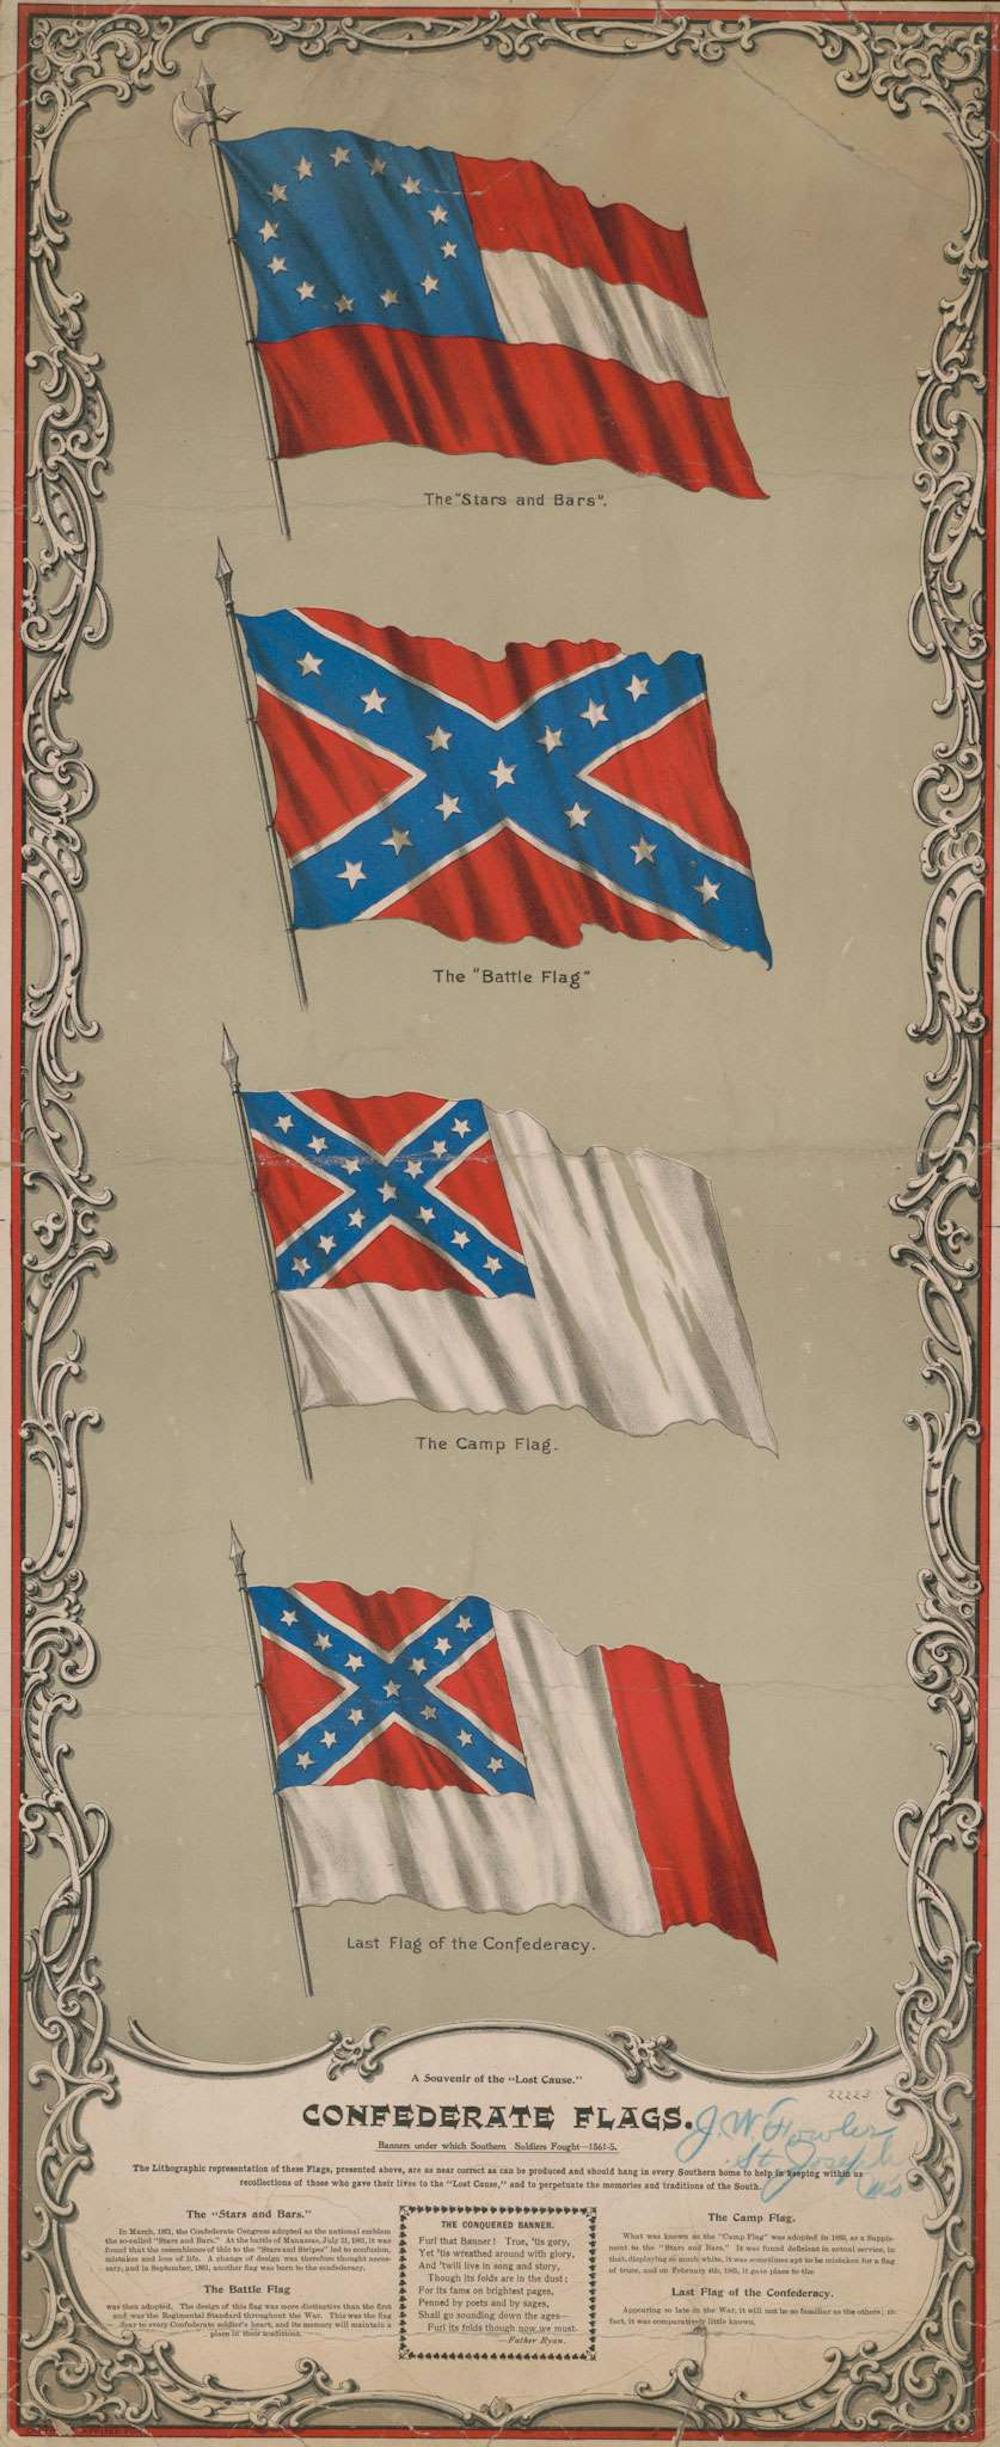 The Confederate battle flag, which rioters flew inside the US Capitol